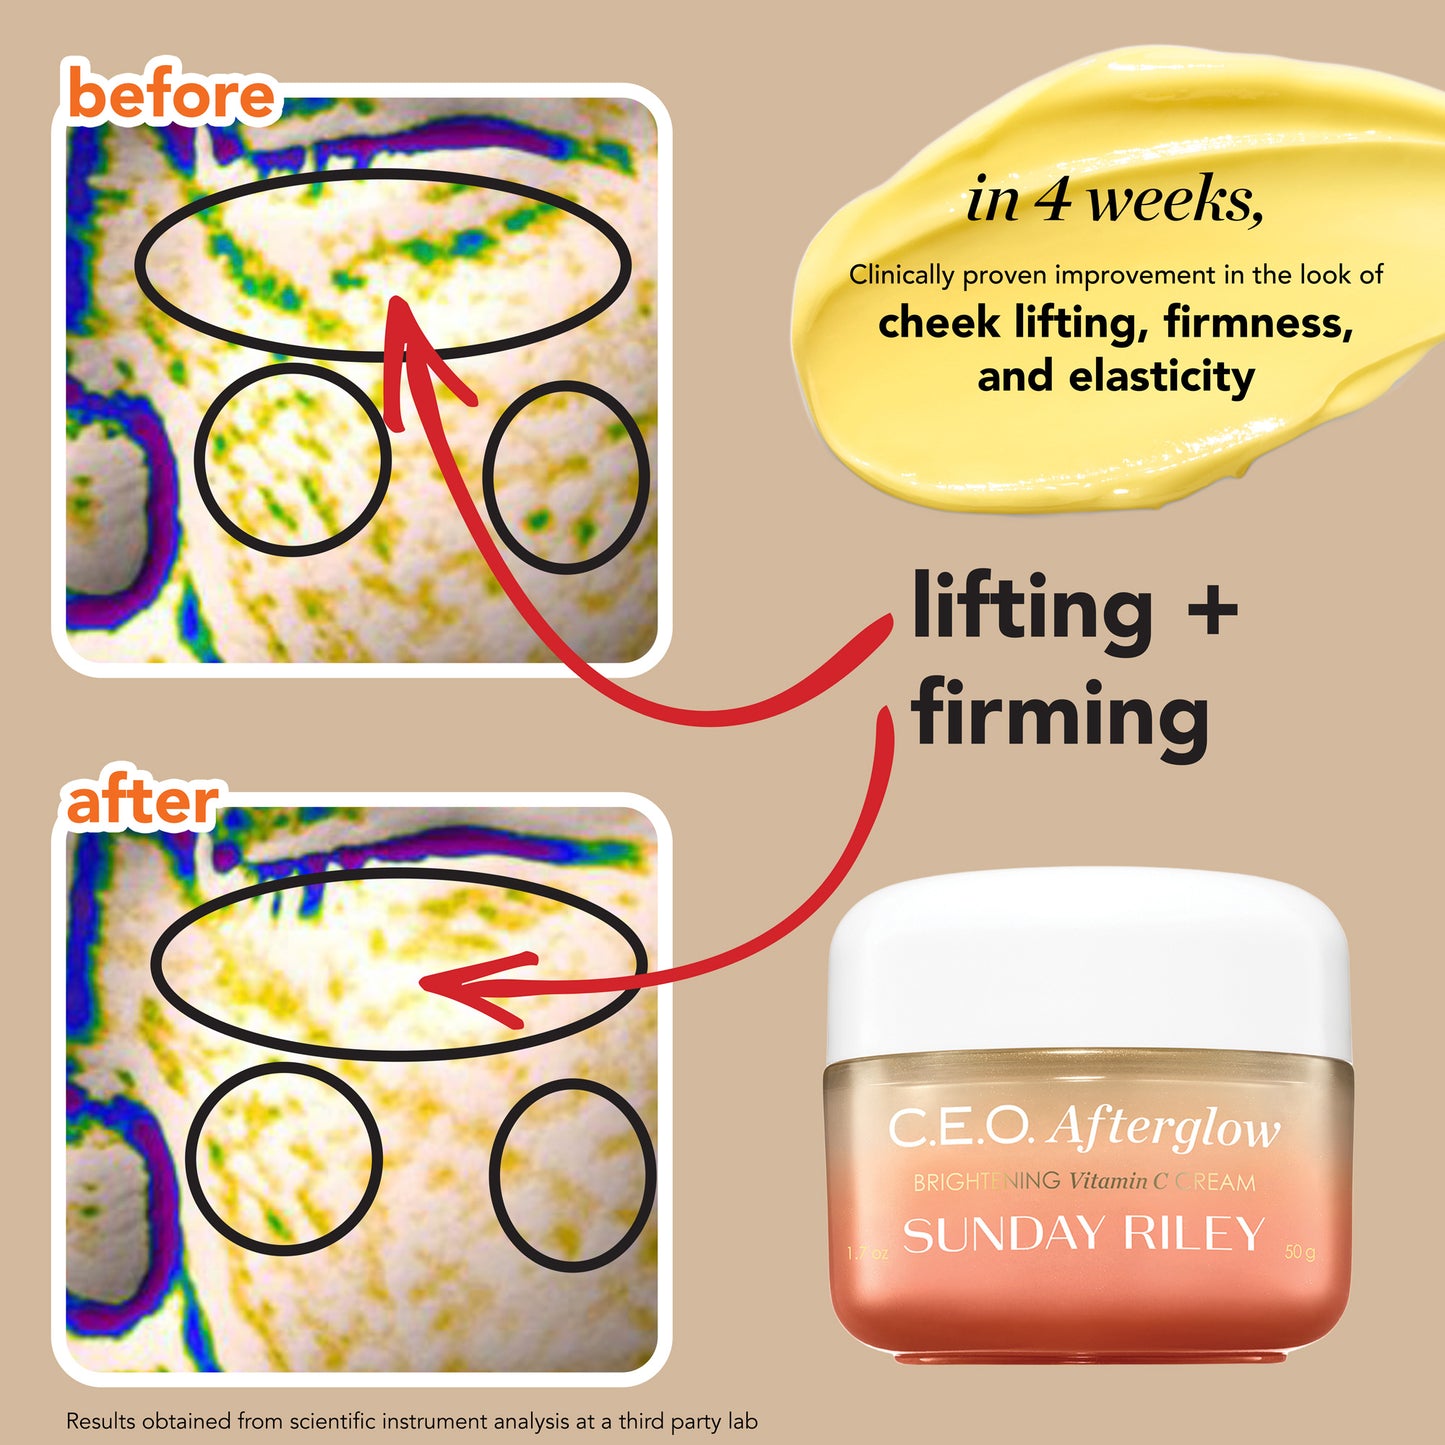 before and after pictures of face after using c.e.o. afterglow showing improved lifting + firming - in 4 weeks, clinically proven improvement in the look of cheek lifting, firmness, and elasticity